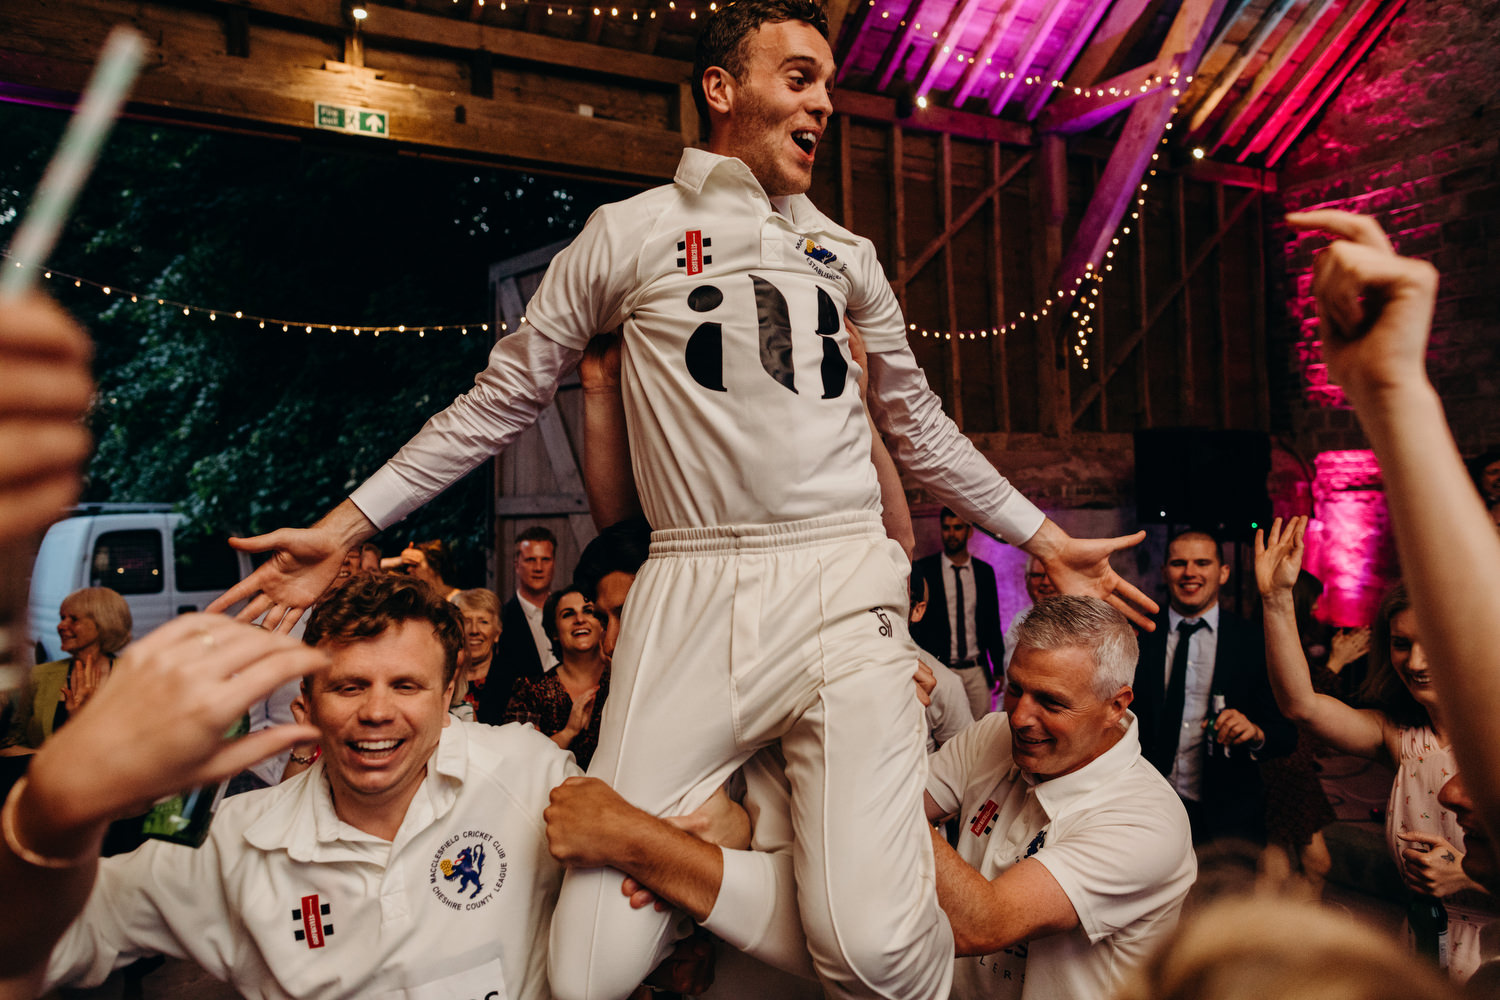 groom gets lifted up in the air by friends at wedding party